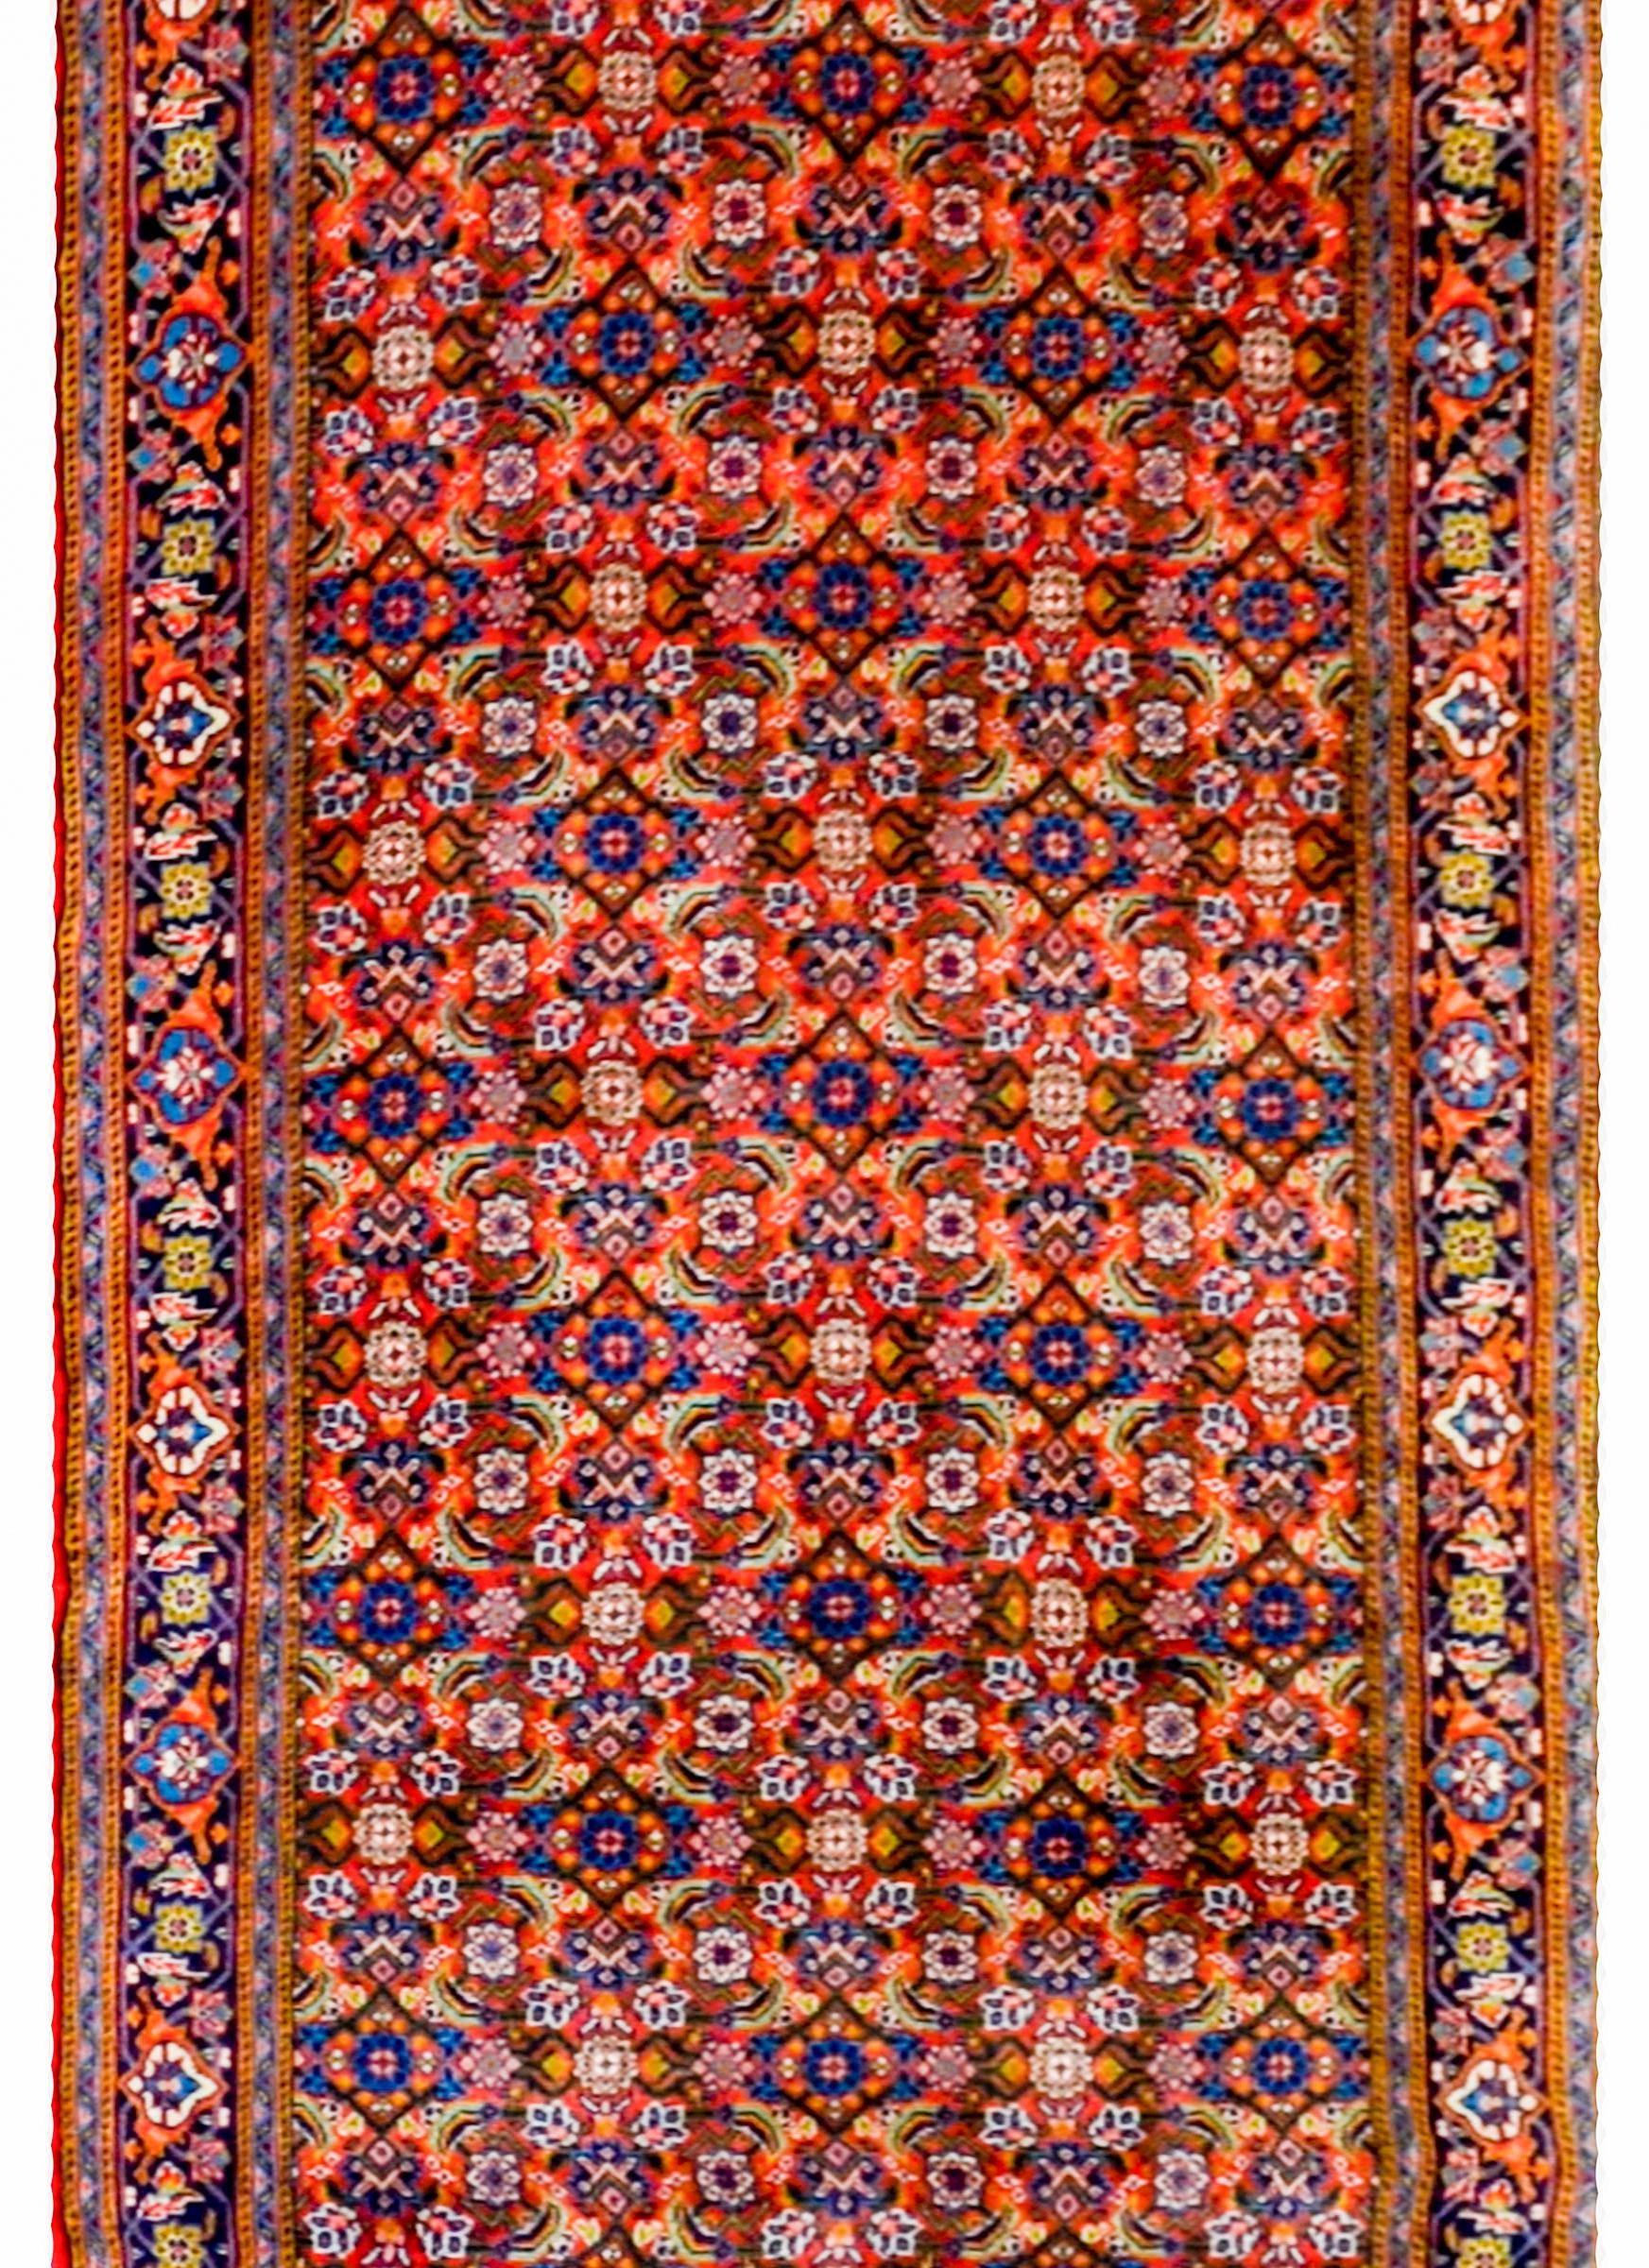 An early 20th century Persian Tabriz runner with a beautiful all-over lattice and floral pattern woven in indigo, pink, green, and gold, on a crimson background. The border is simple, with a wide central floral patterned stripe flanked by three